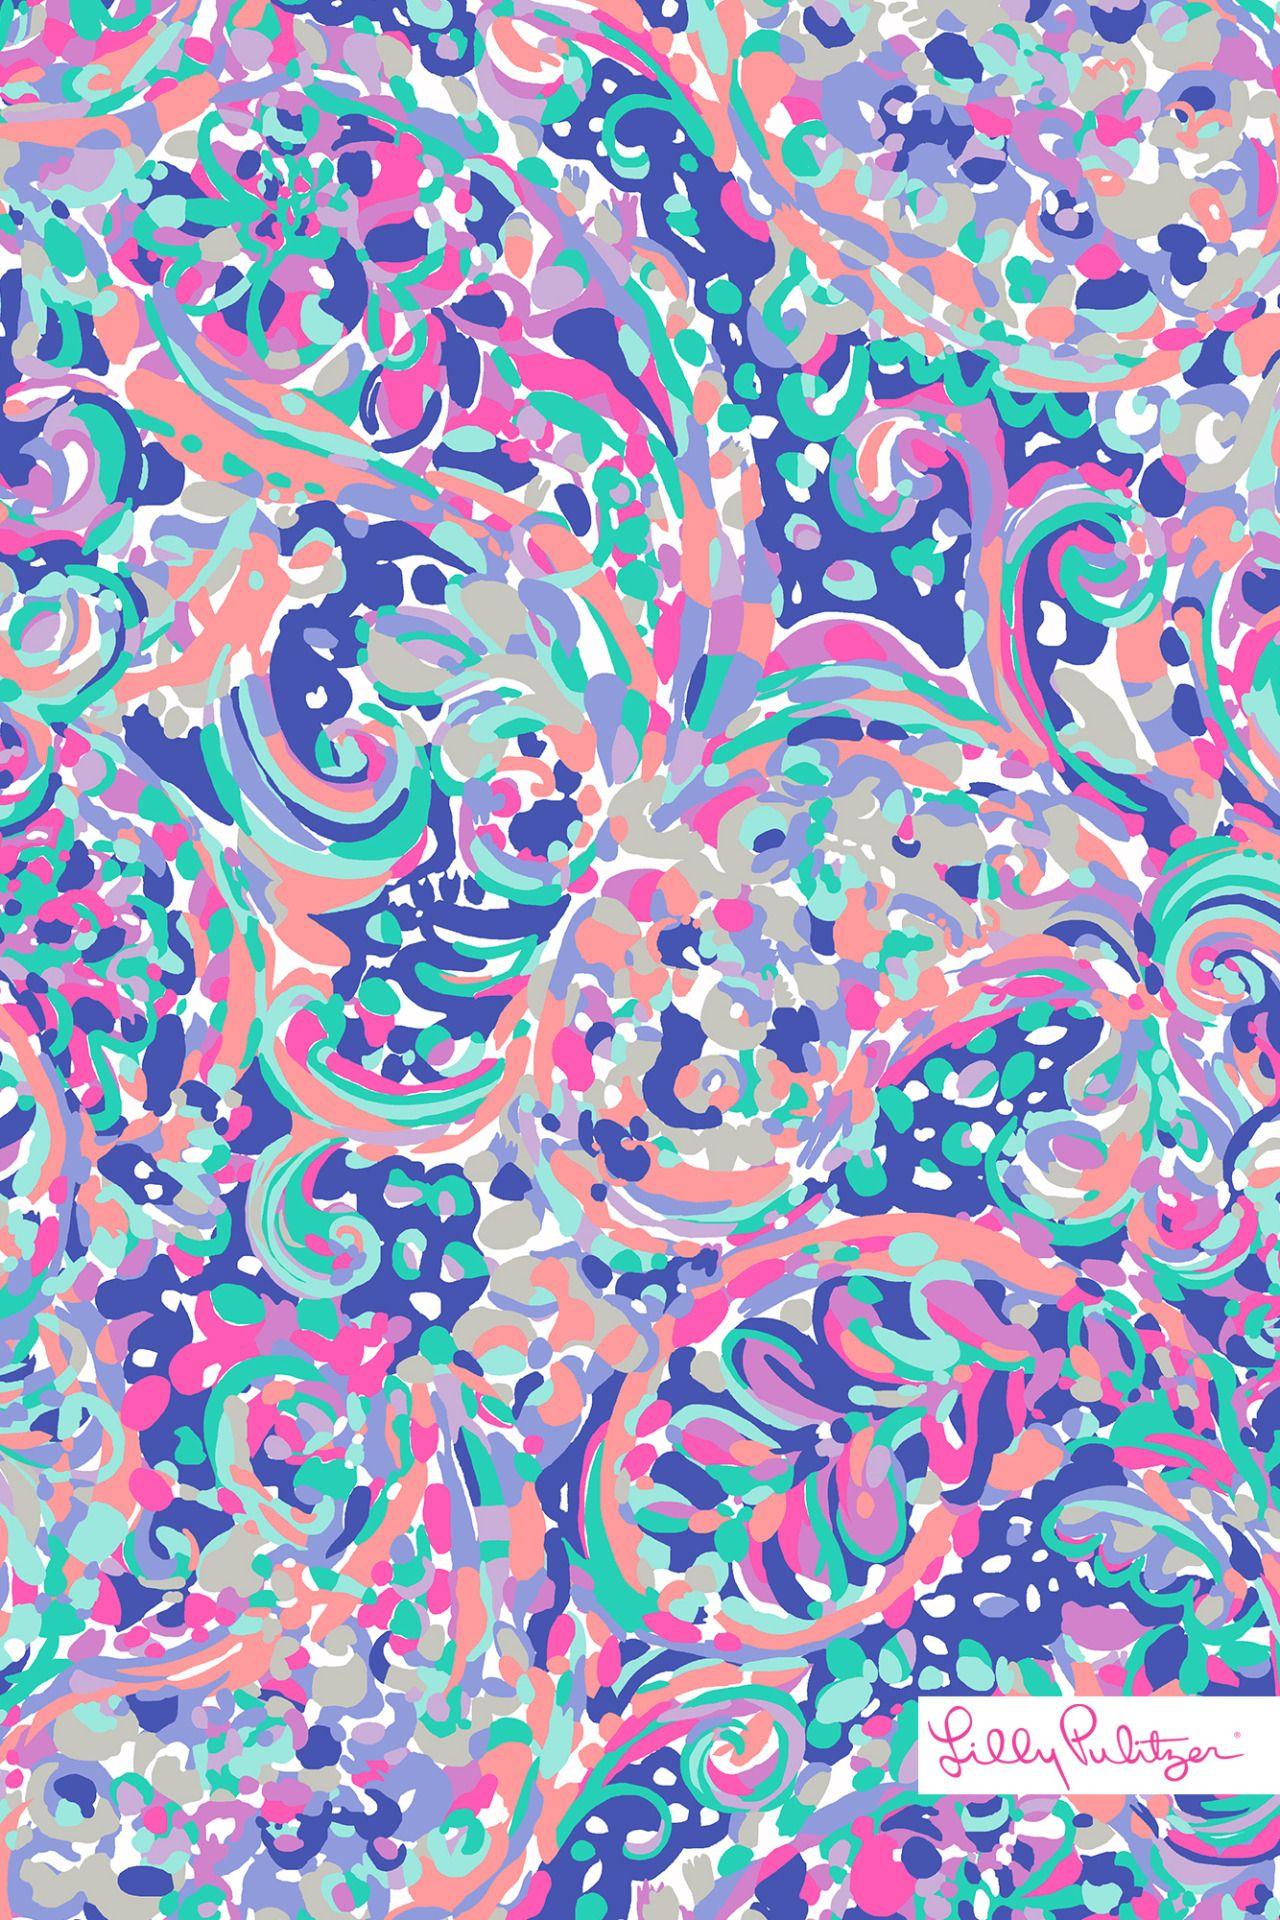 Lilly Pulitzer Iphone Wallpaper And Wallpapers On Pinterest